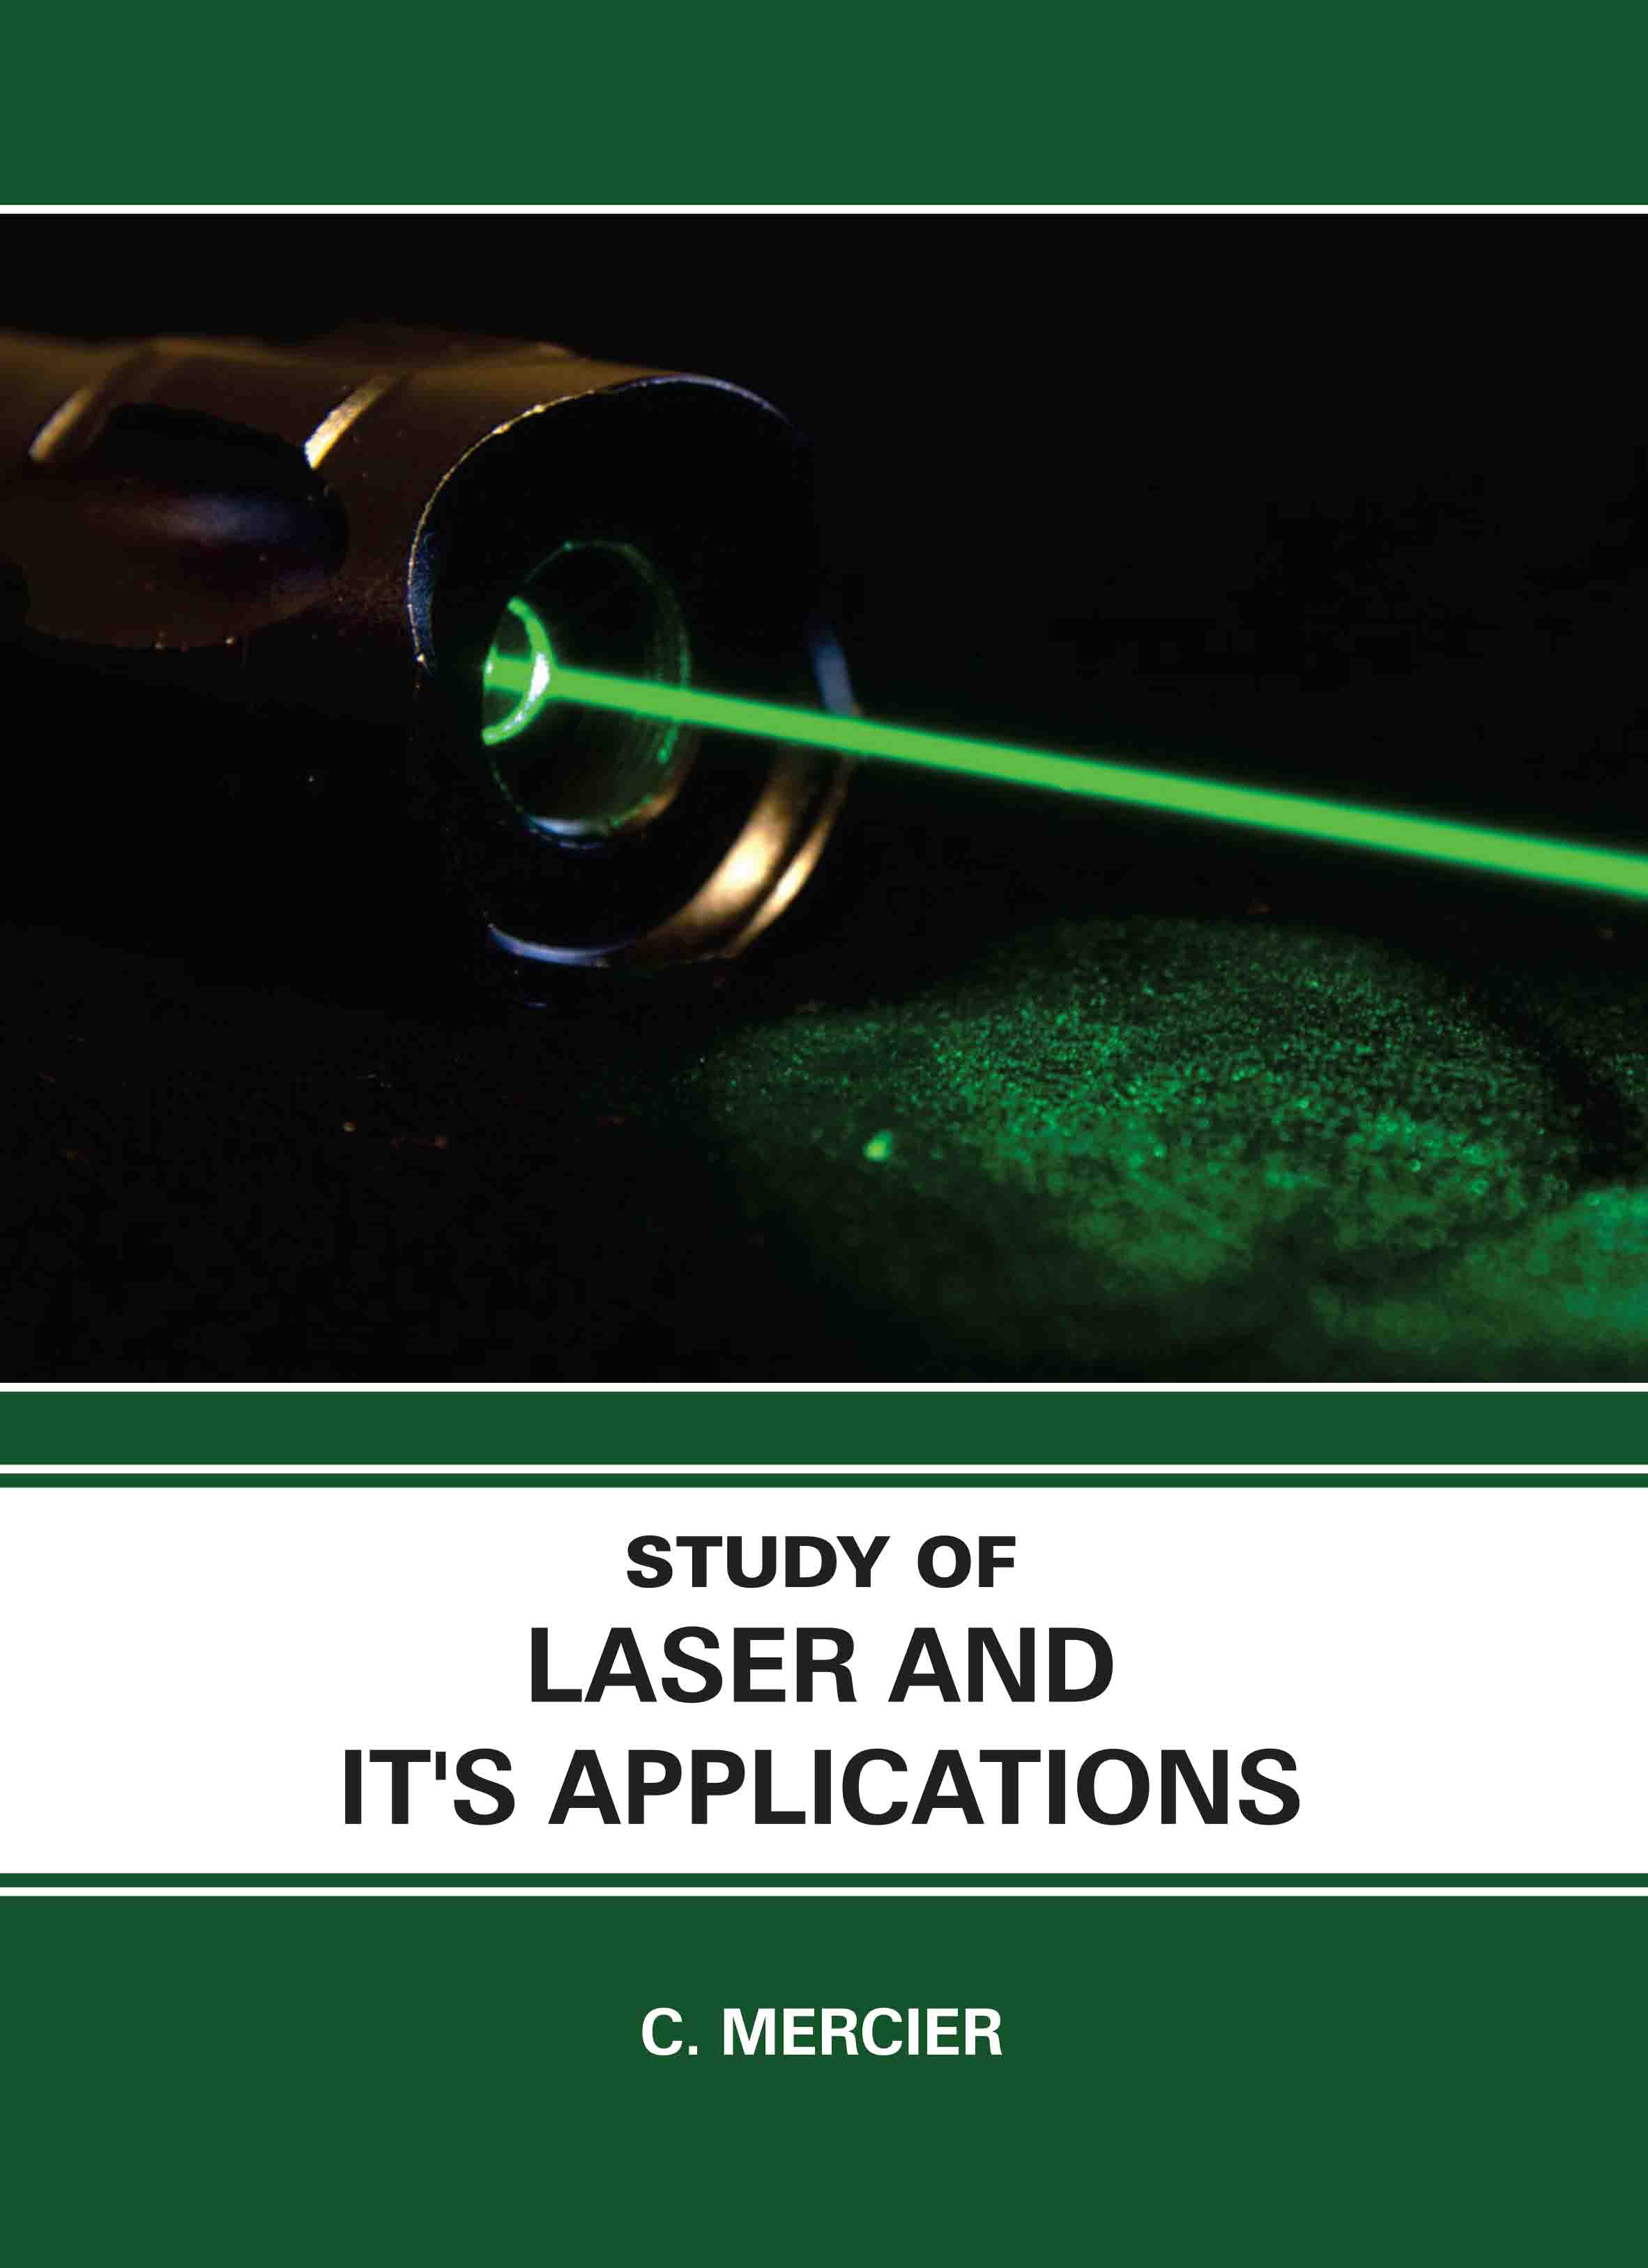 Study of Laser and It's Applications